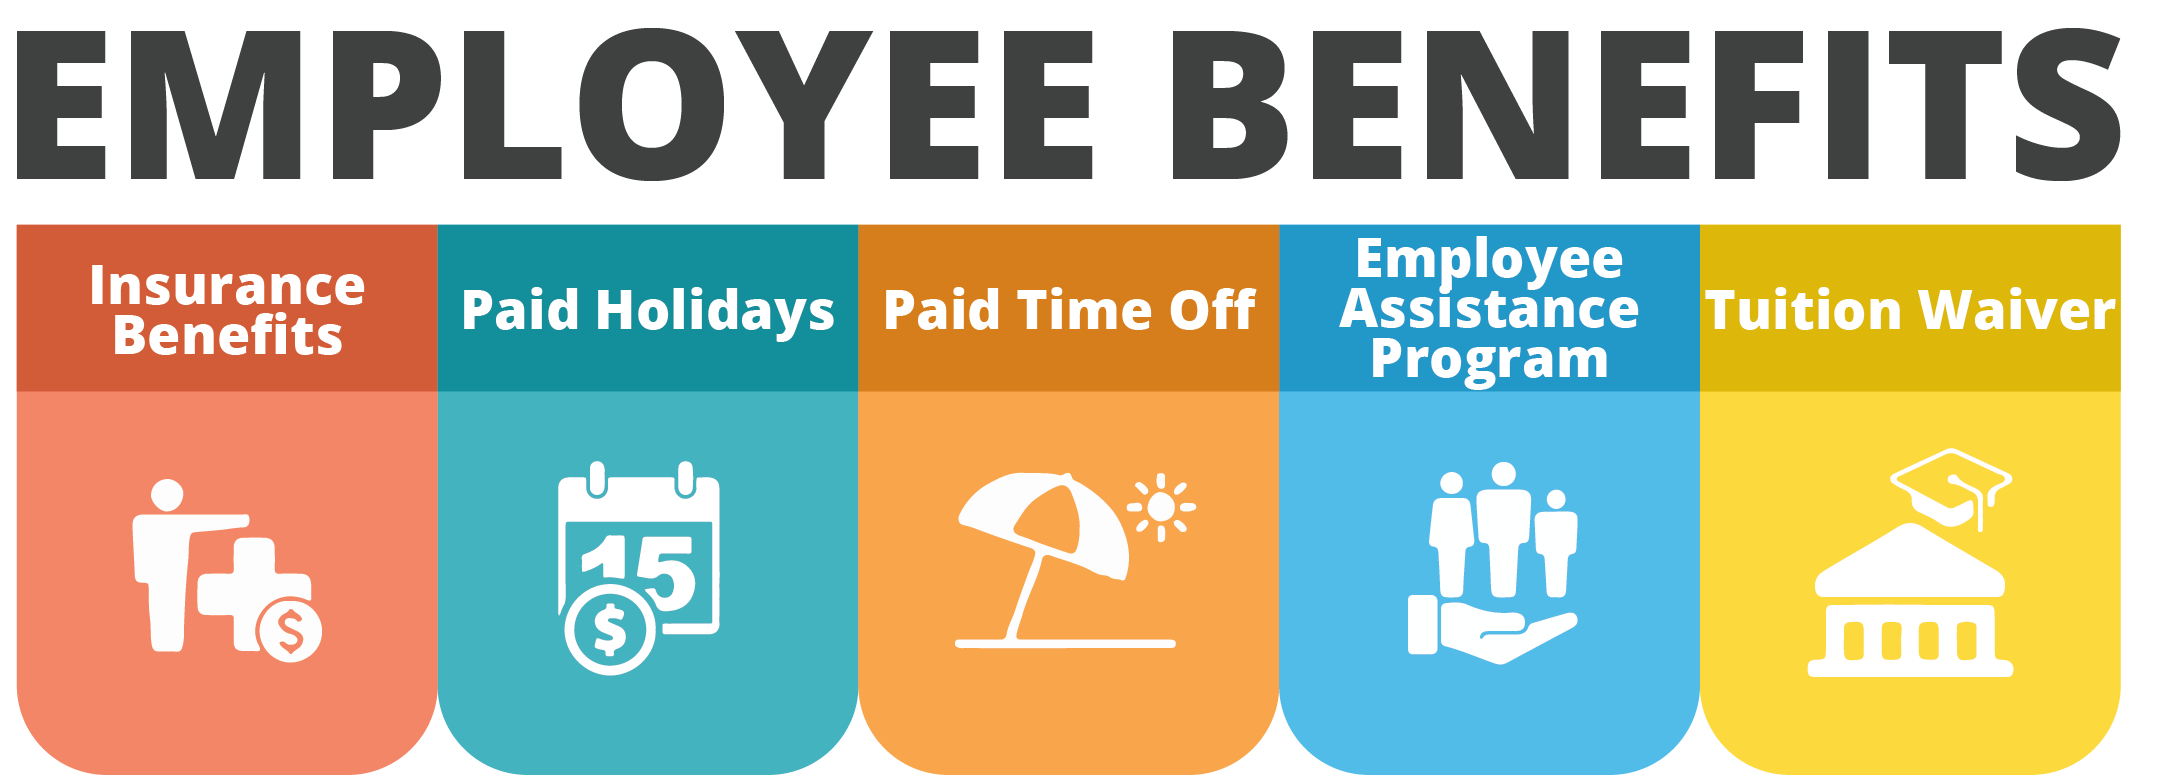 Employee Benefits: insurance benefits, paid holidays, paid time off, employee assistance program, and tuition waiver.